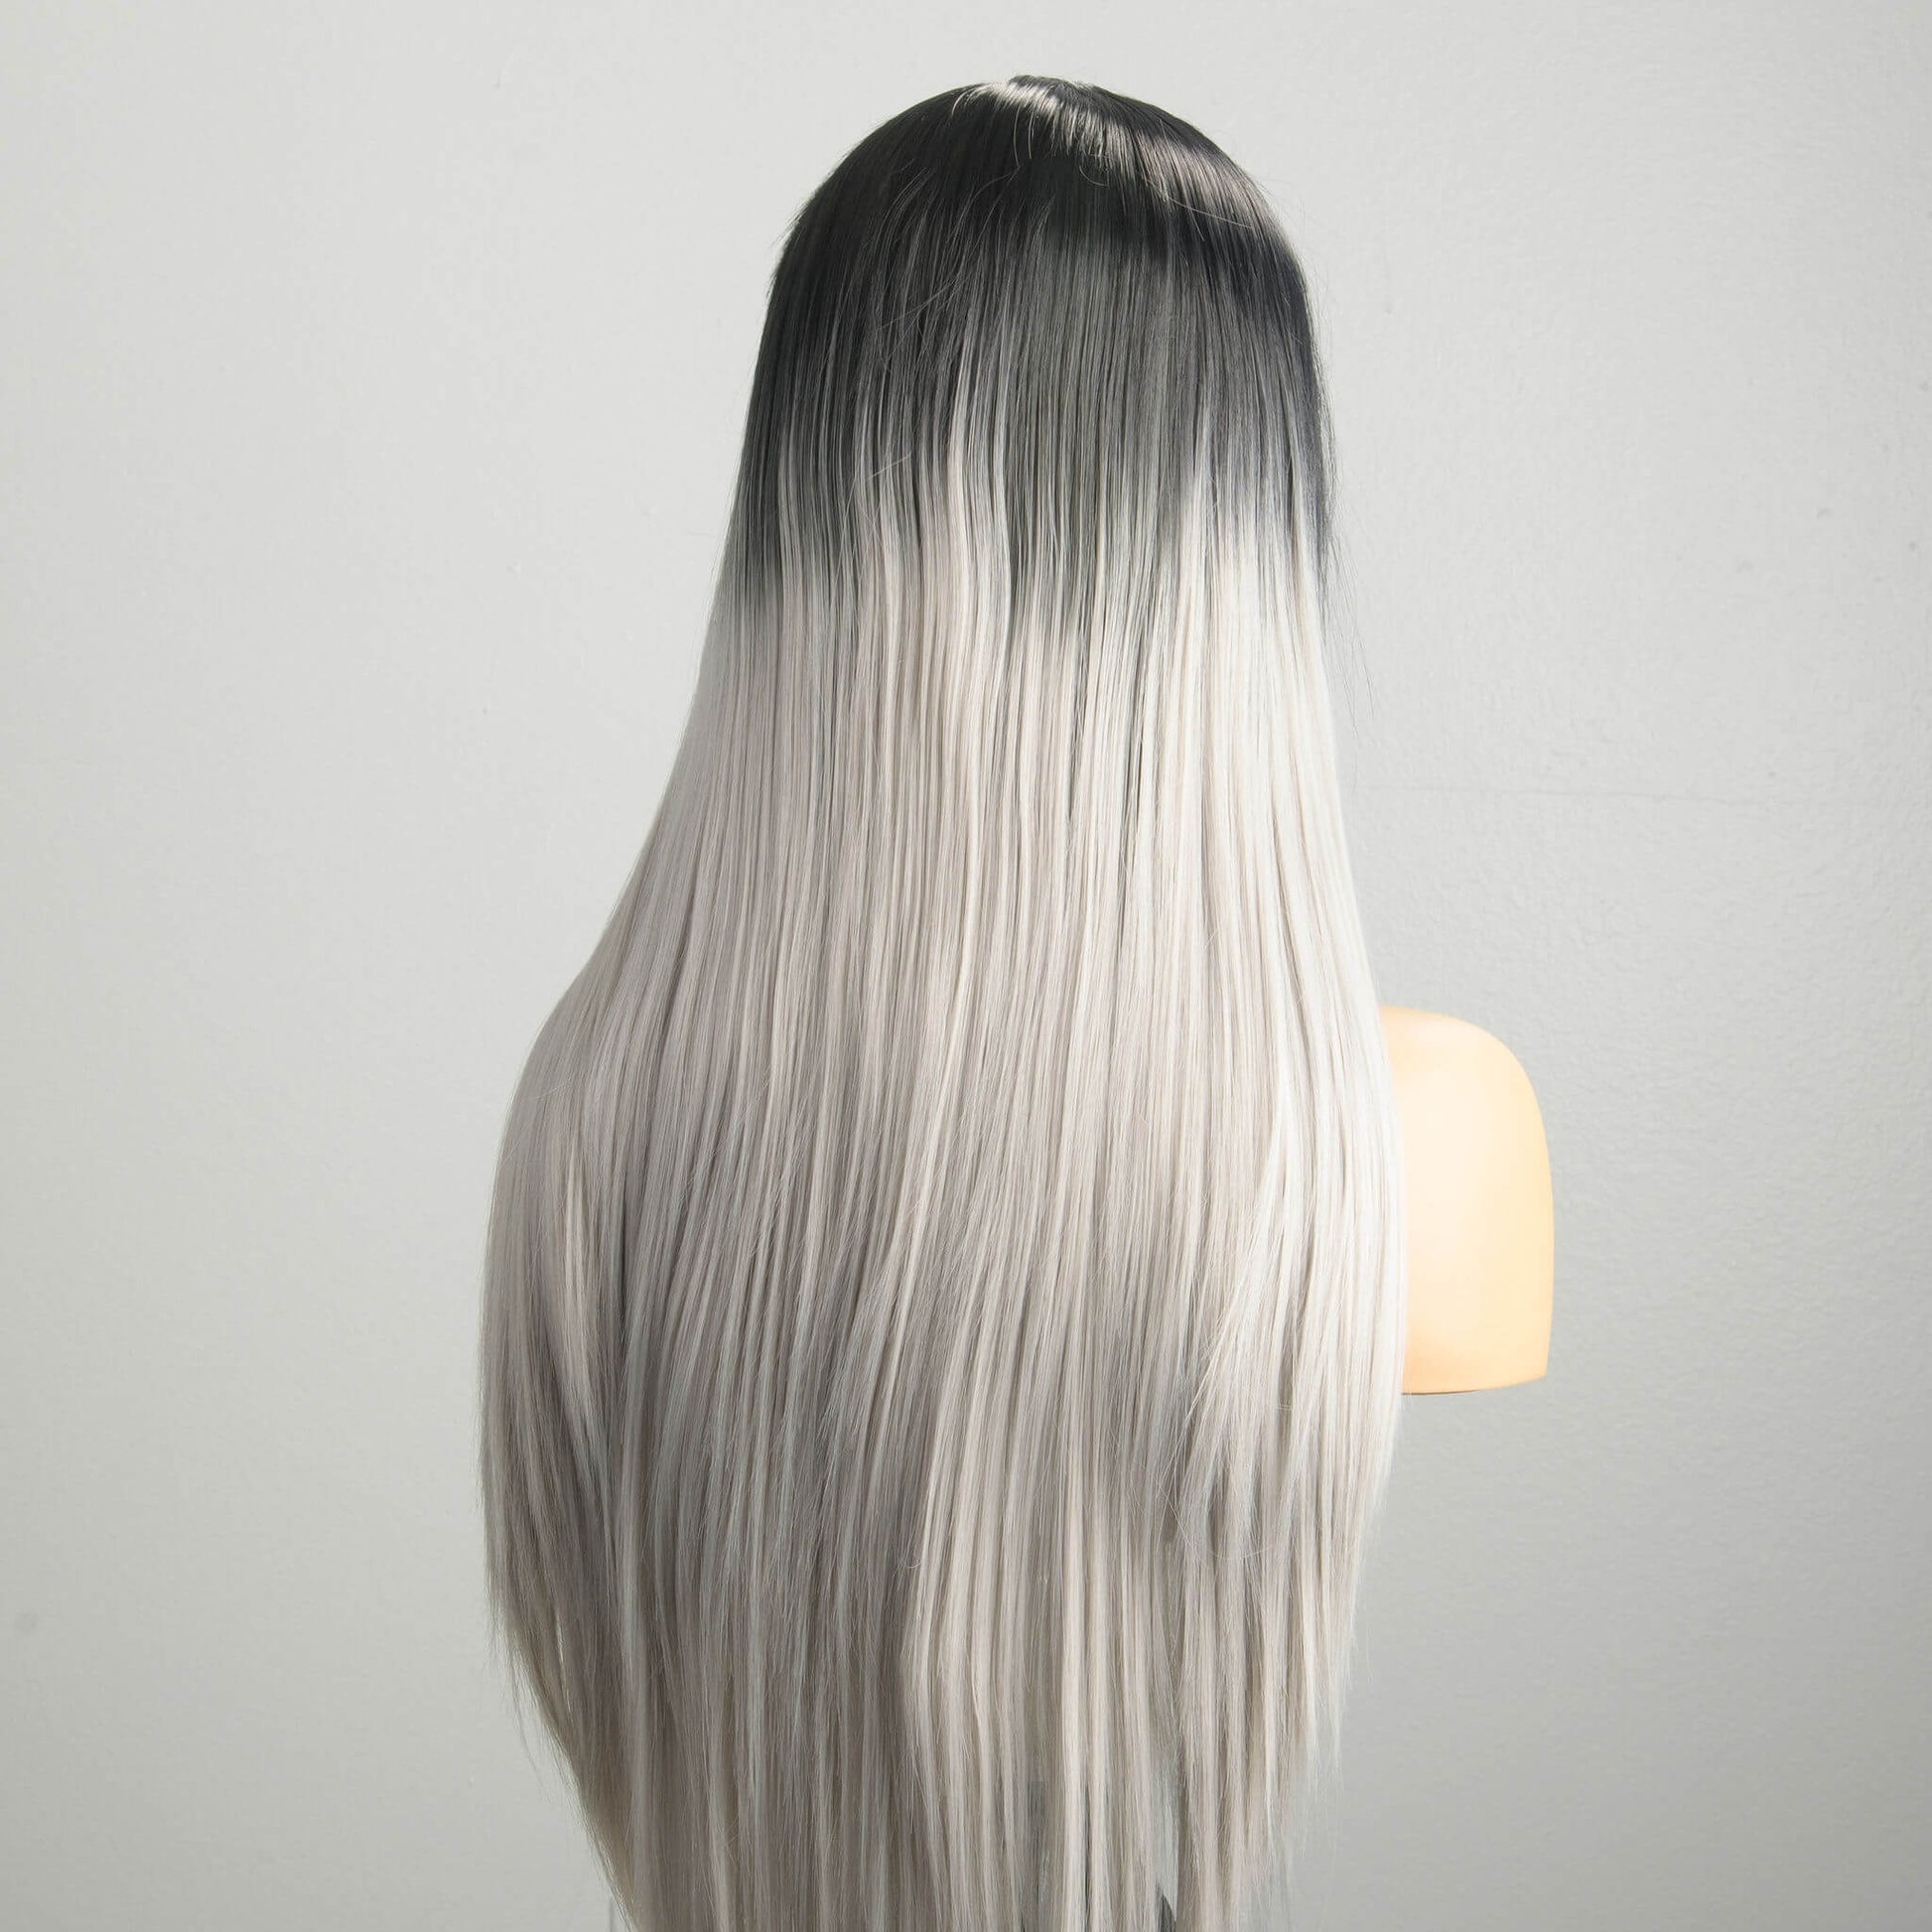 "Asteroid Maiden" | Synthetic Lace Front Wig | Long Straight Black to Gray Ombre Wig